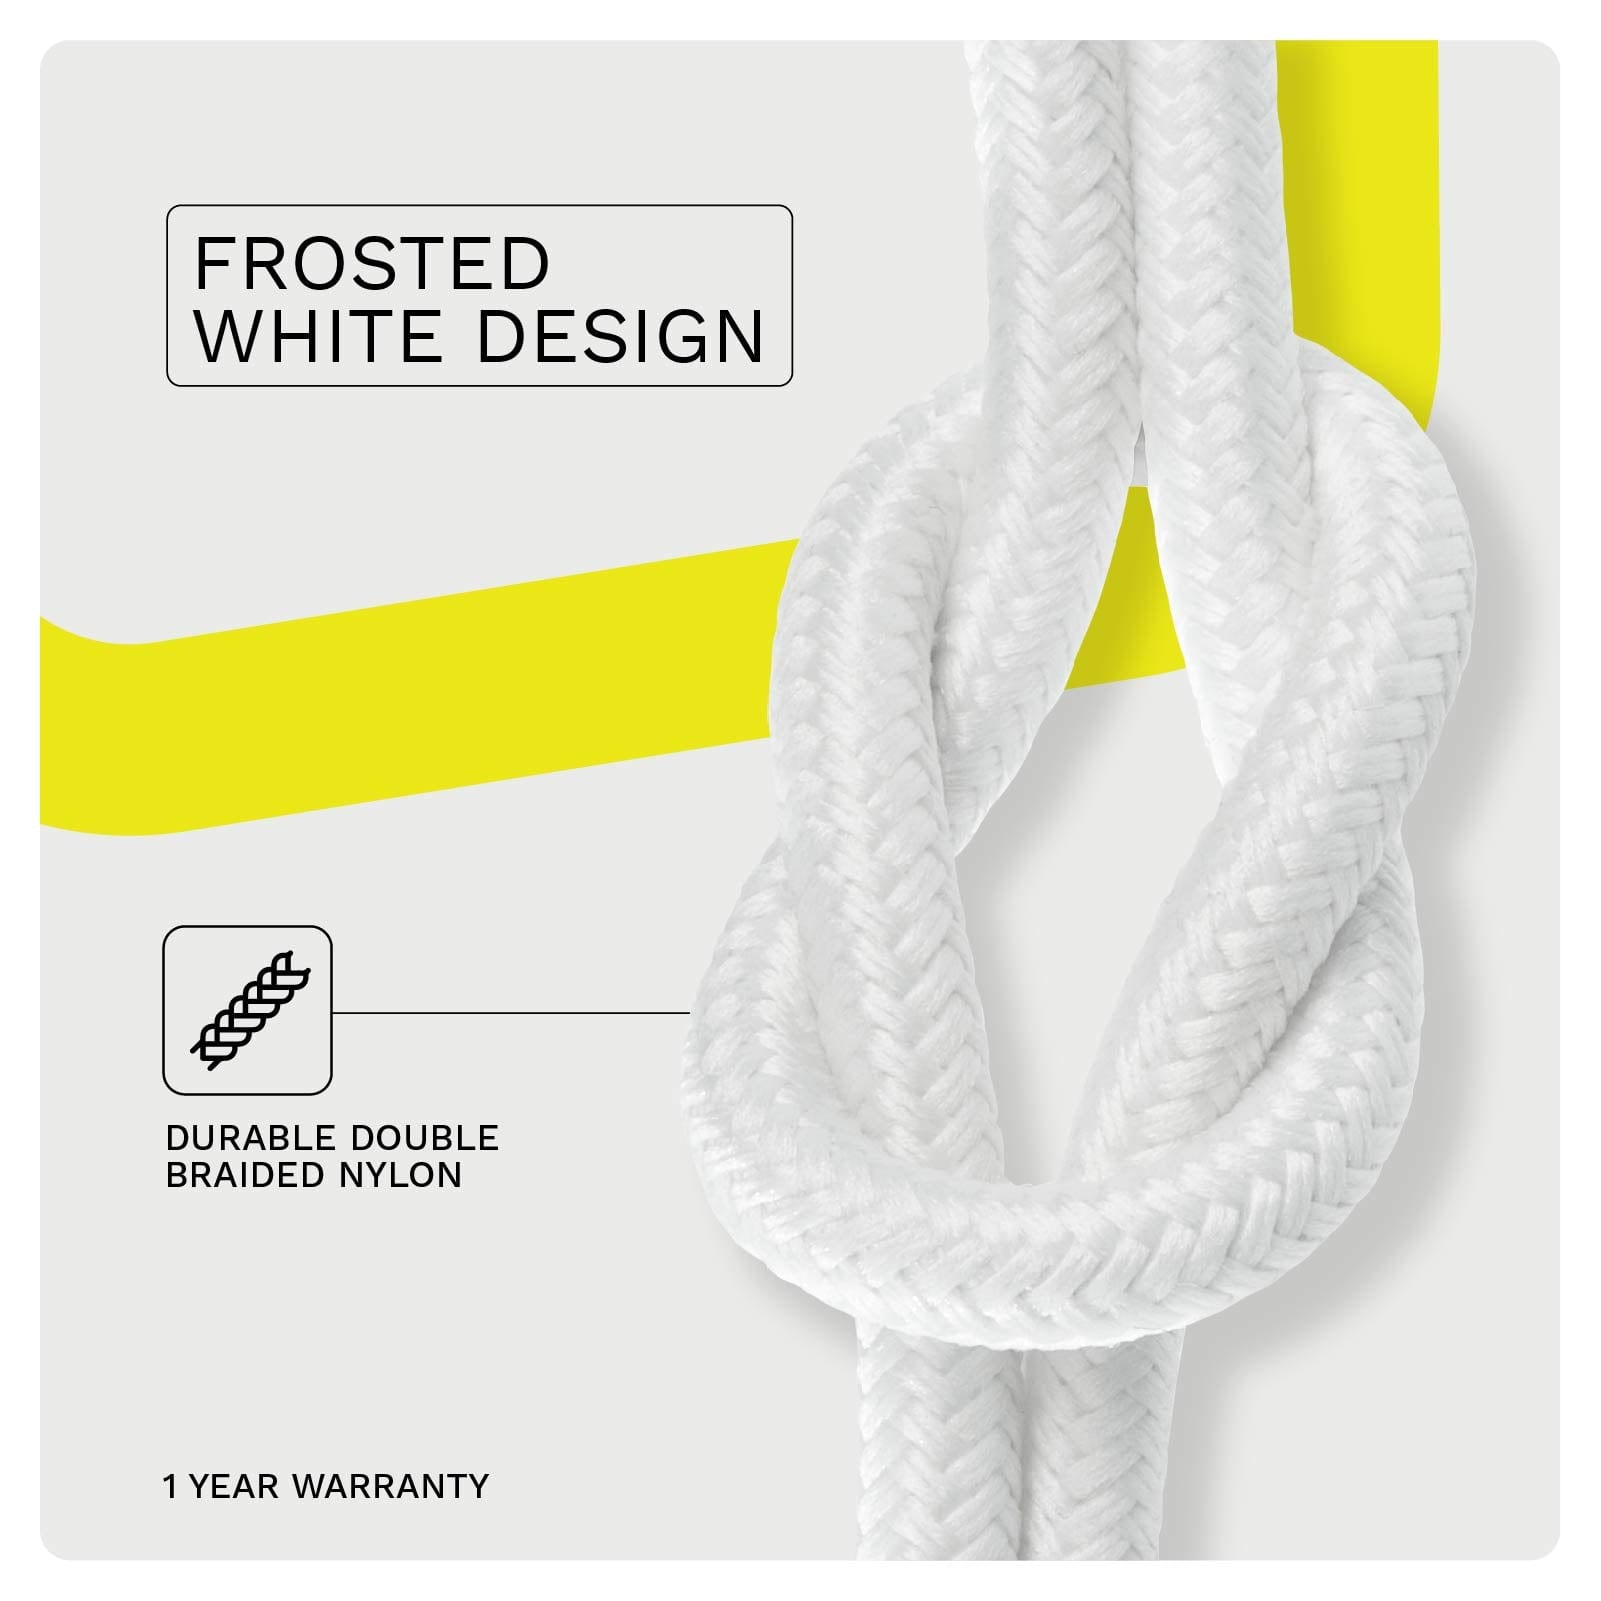 FROSTED WHITE DESIGN. DUABLE DOUBLE BRAIDED NYLON. 1 YEAR WARRANTY.